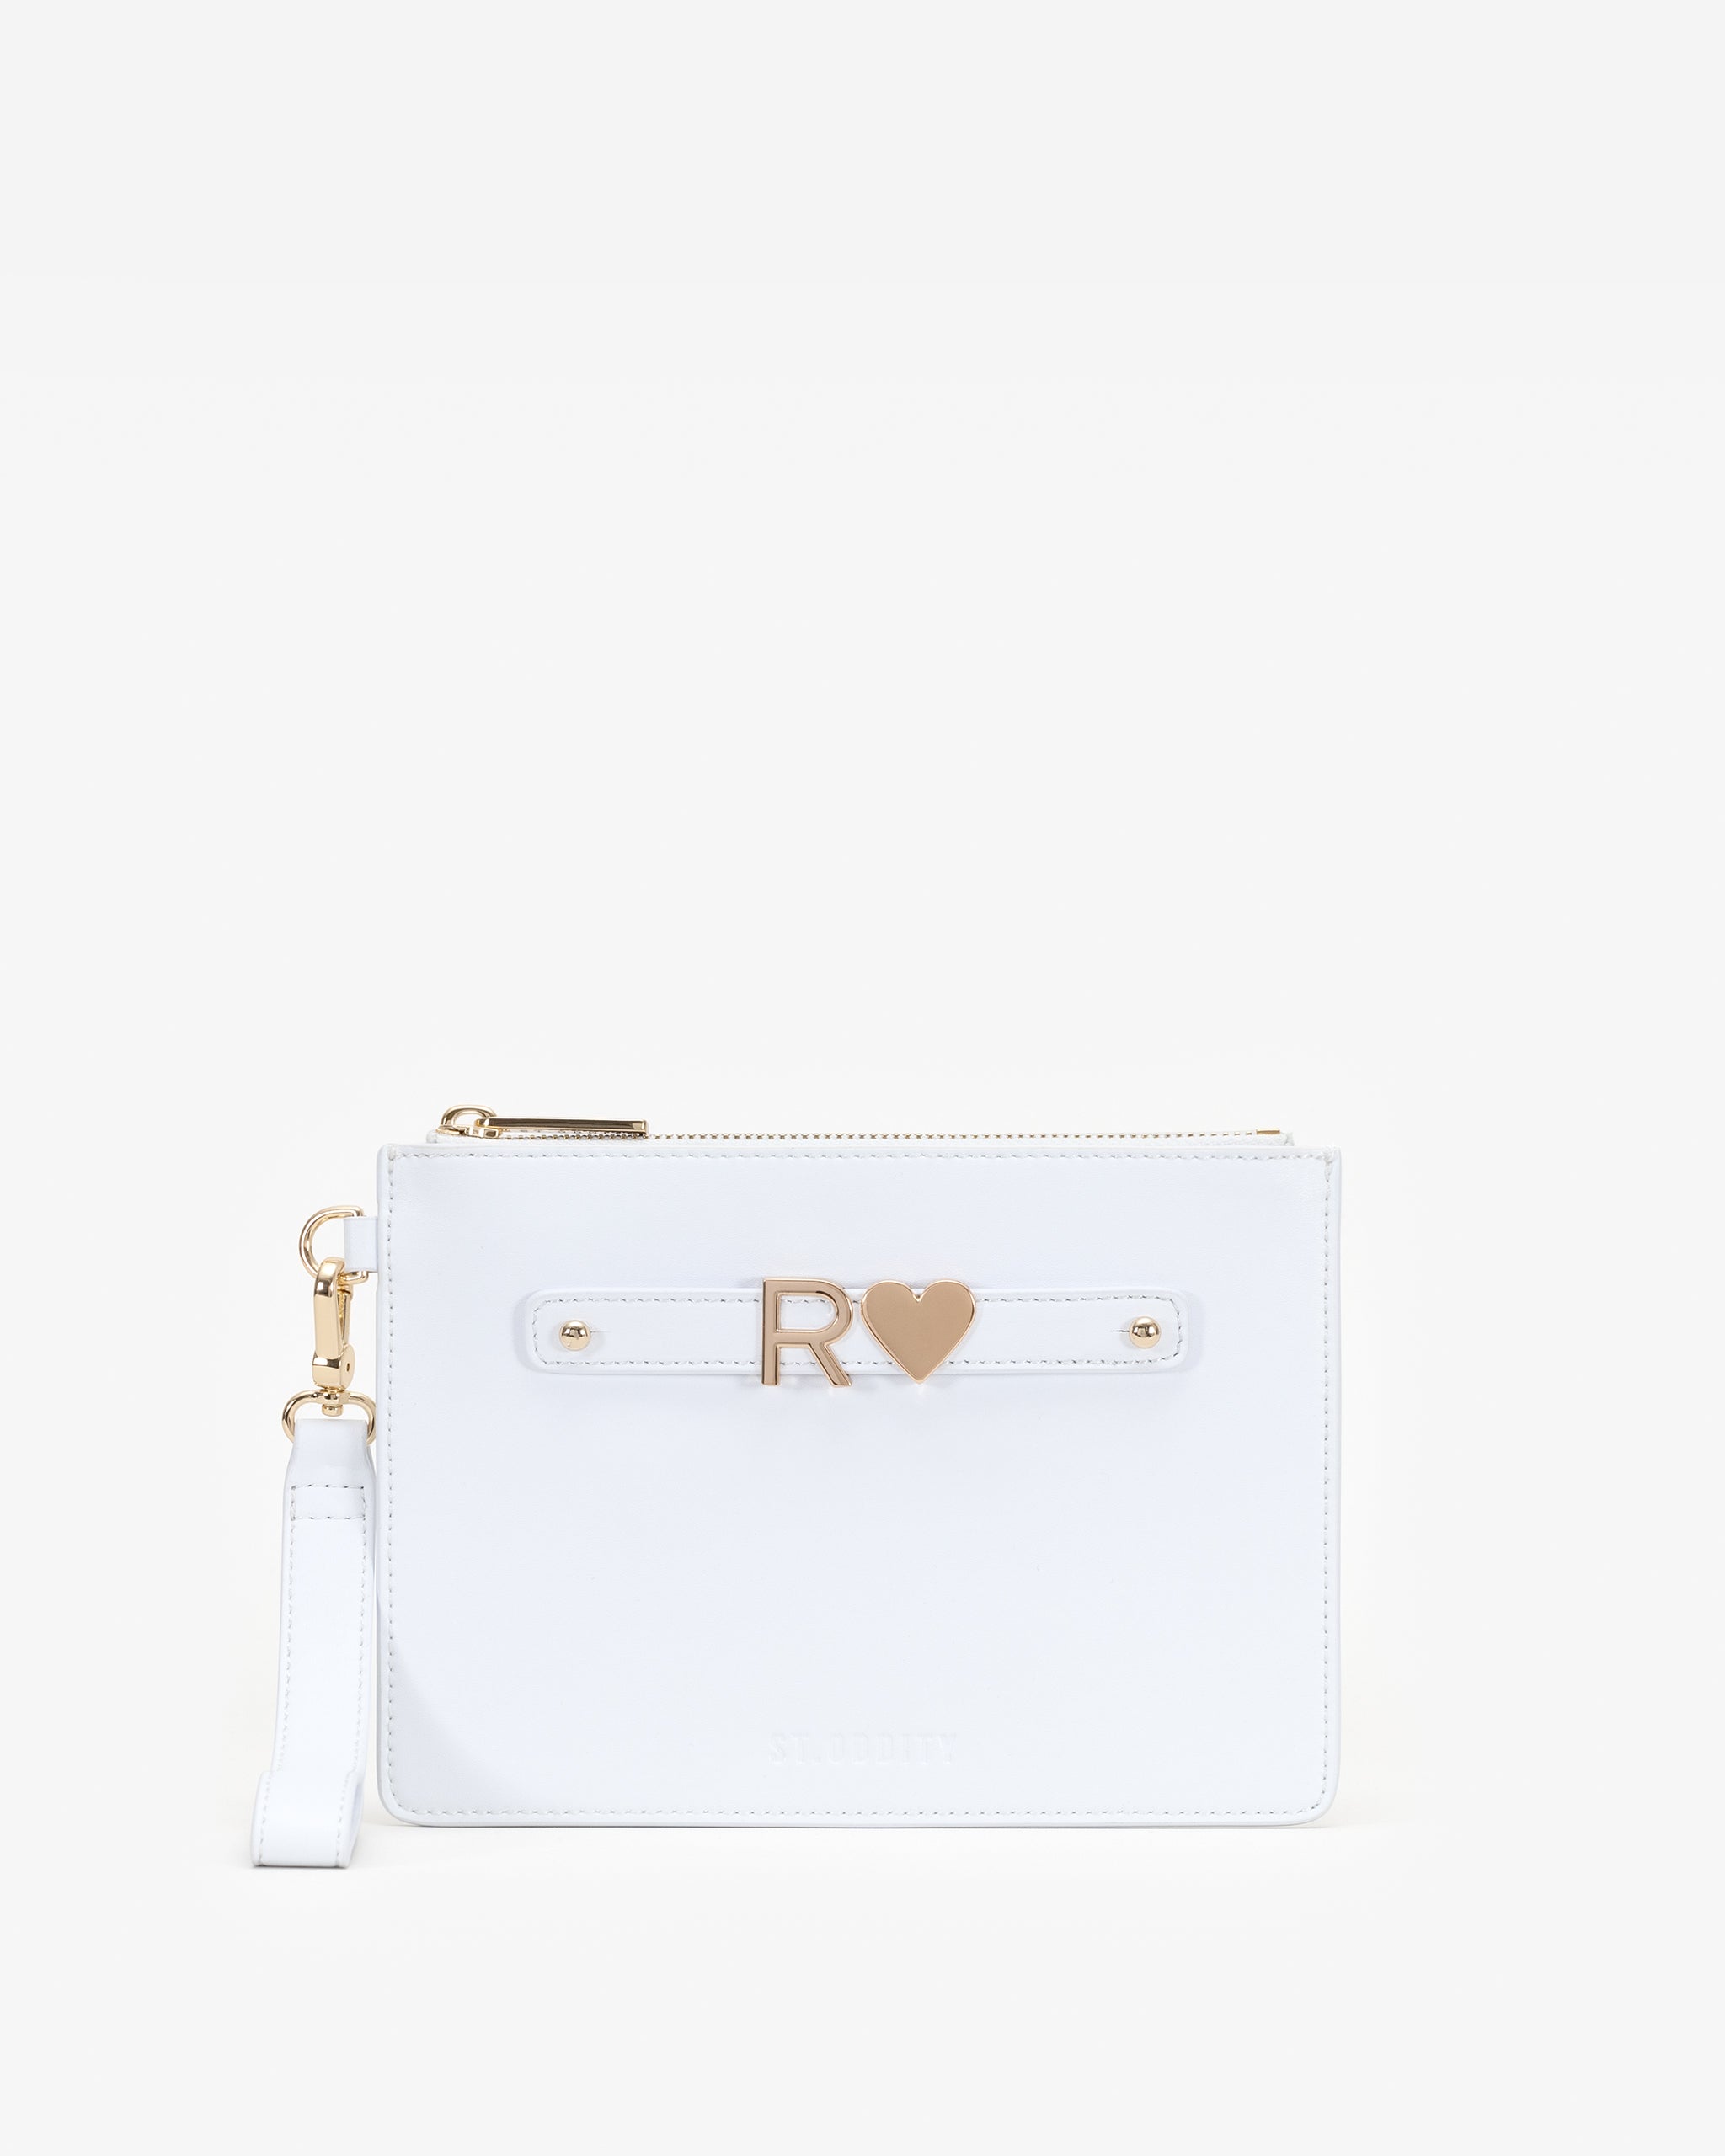 Pre-order (Mid-May): Classic Pouch in White with Personalised Hardware